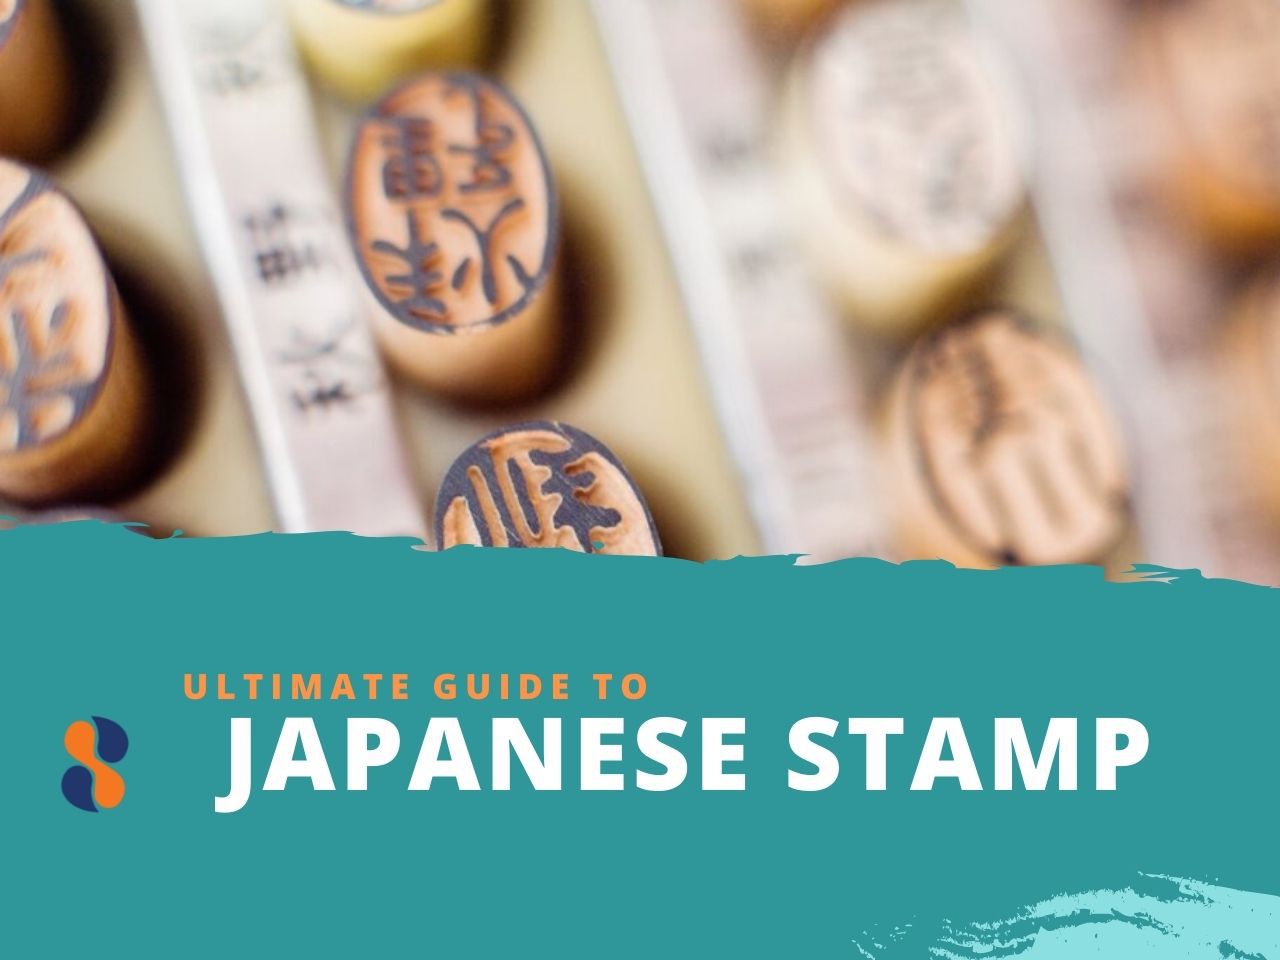 Ultimate Guide to the Japanese Stamp (Inkan/Hanko) - Japan Switch